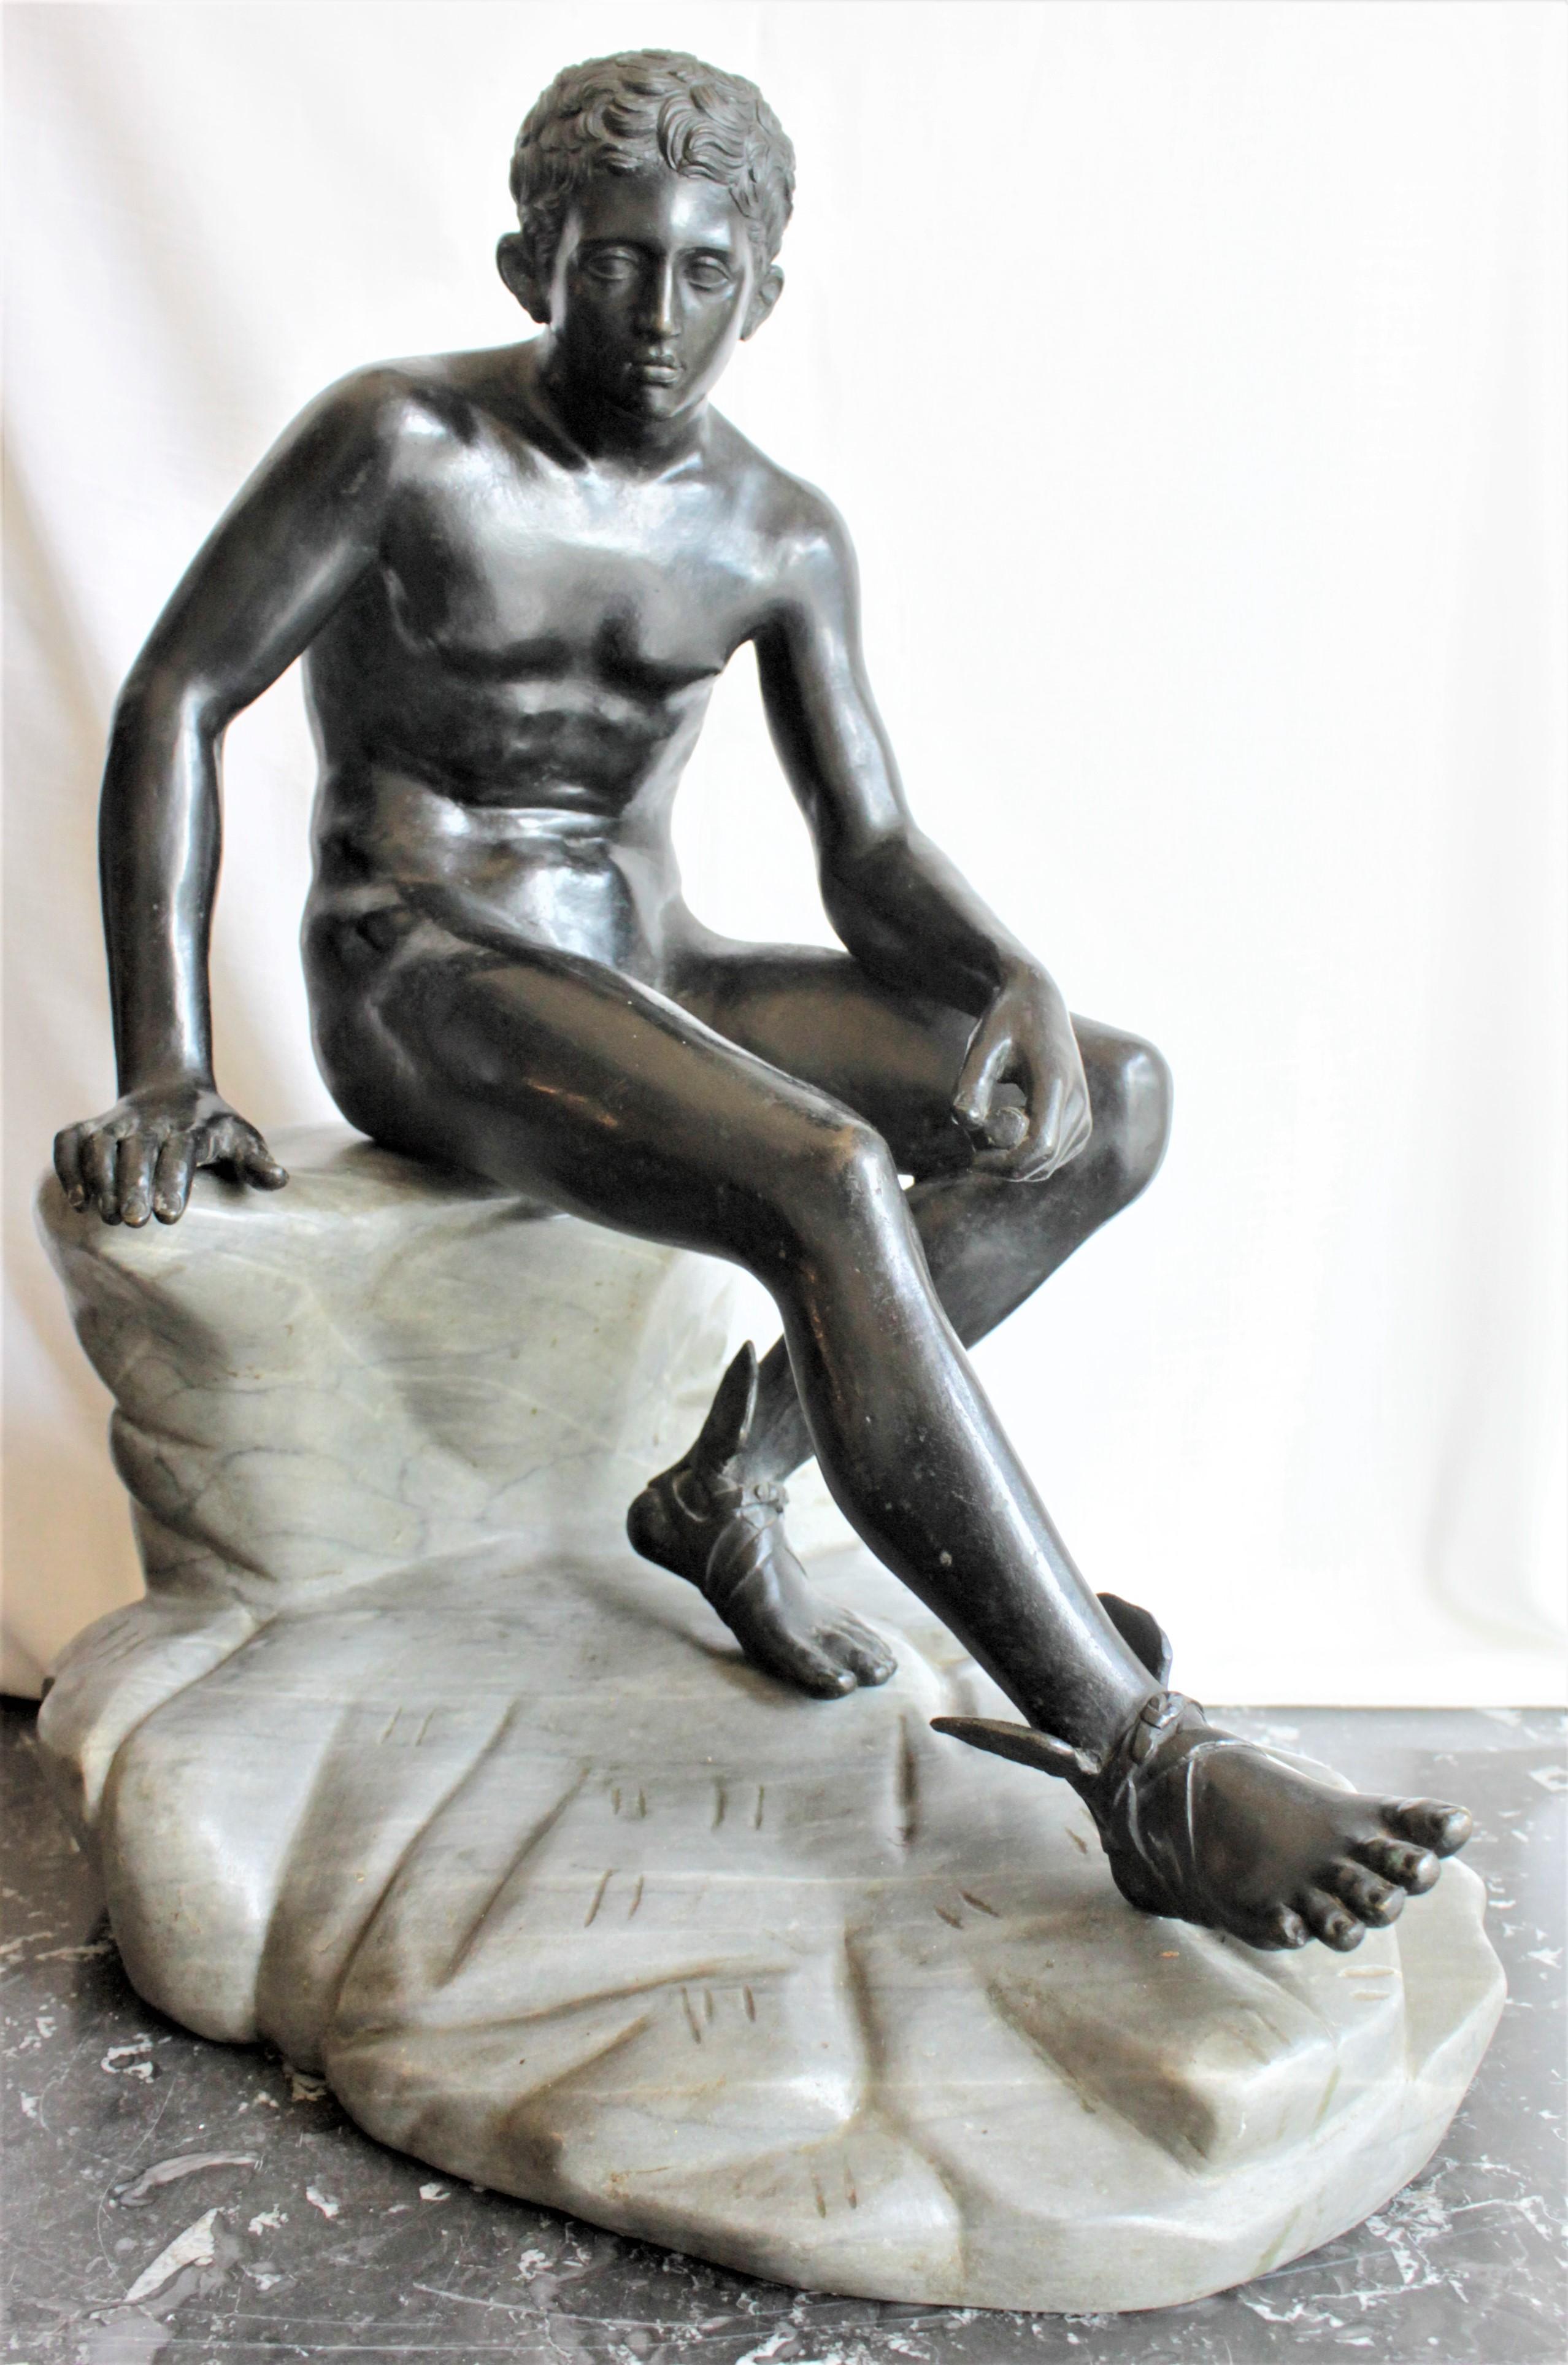 This large and substantial cast bronze sculpture is unsigned, but presumed to have been made in circa 1880 for the Grand Tour. The sculpture depicts the Greek god Hermes or mercury seated on a rock with one leg extended. The casting is very detailed